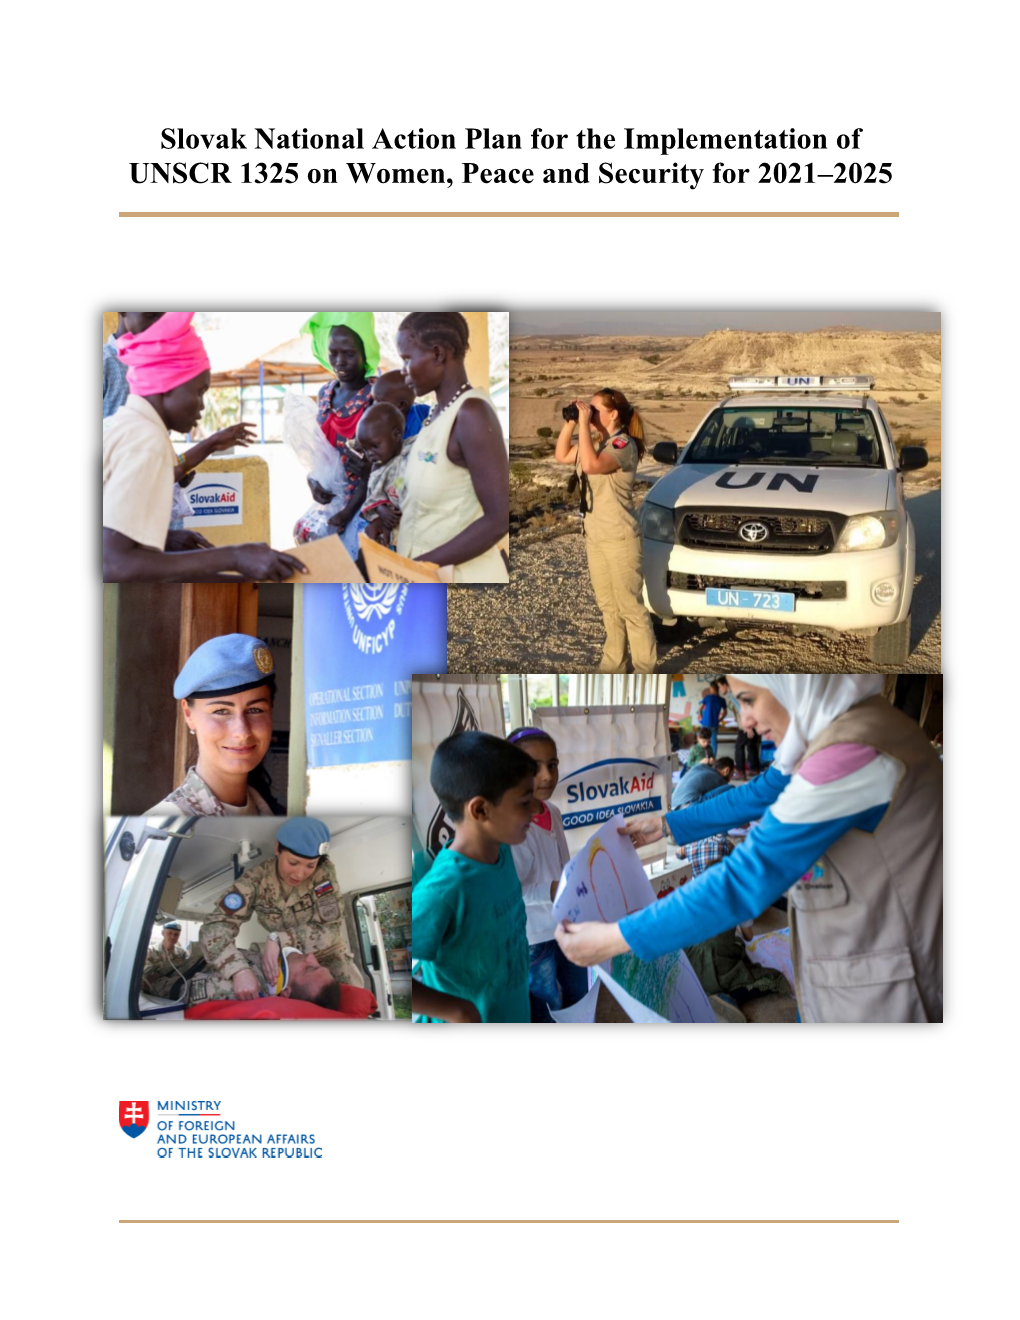 Slovak National Action Plan for the Implementation of UNSCR 1325 on Women, Peace and Security for 2021–2025